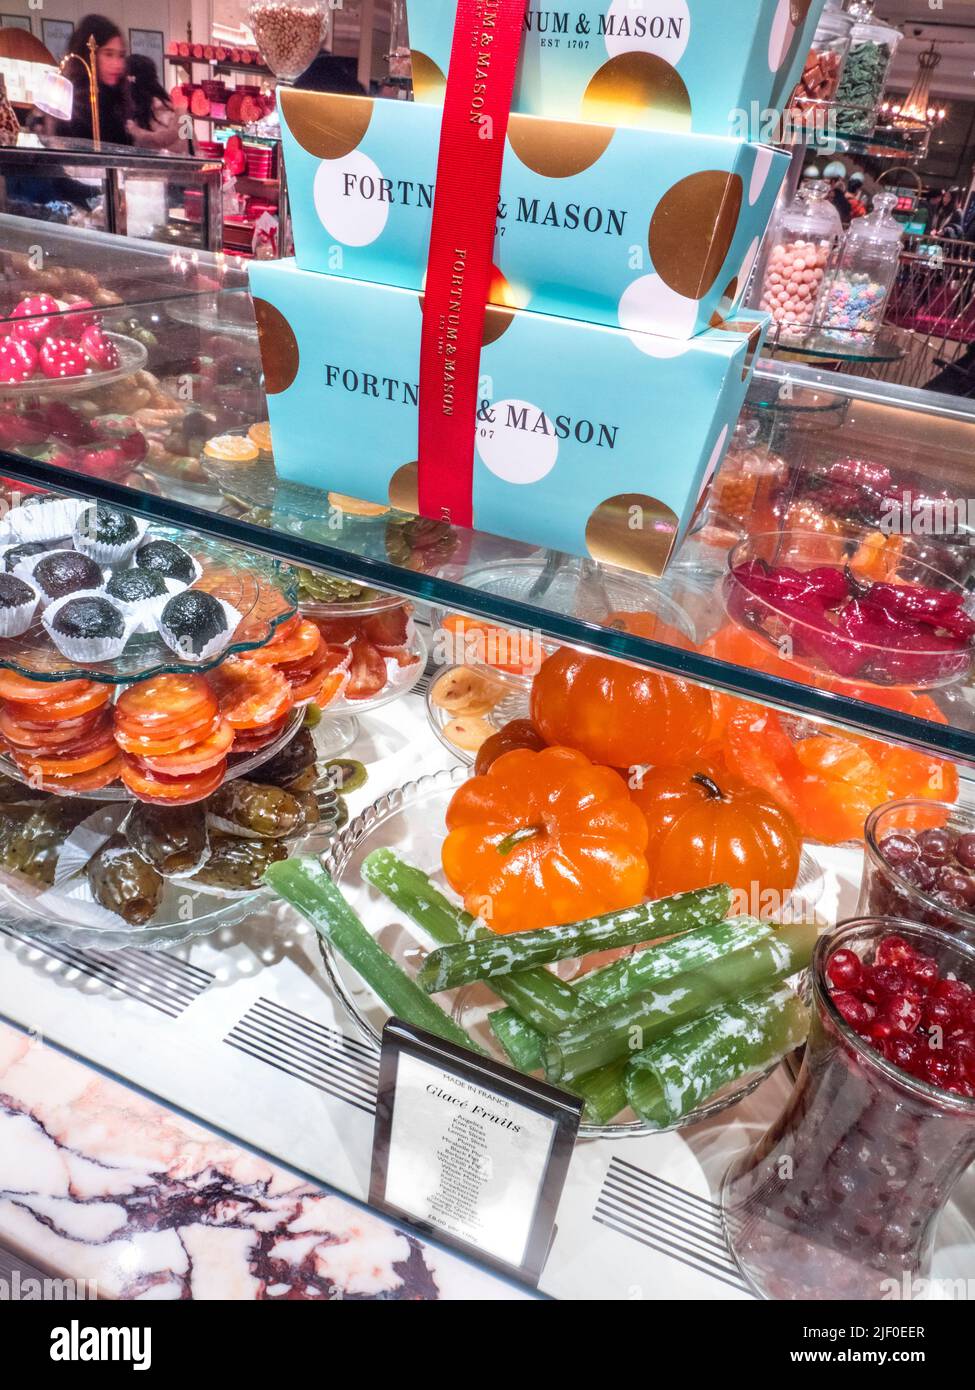 Fortnum & Mason Food Hall with luxury display of hand made glacé fruits selection, Angelica, Kiwi slices , Black figs, Lemon slices, Peach halves, etc Stock Photo